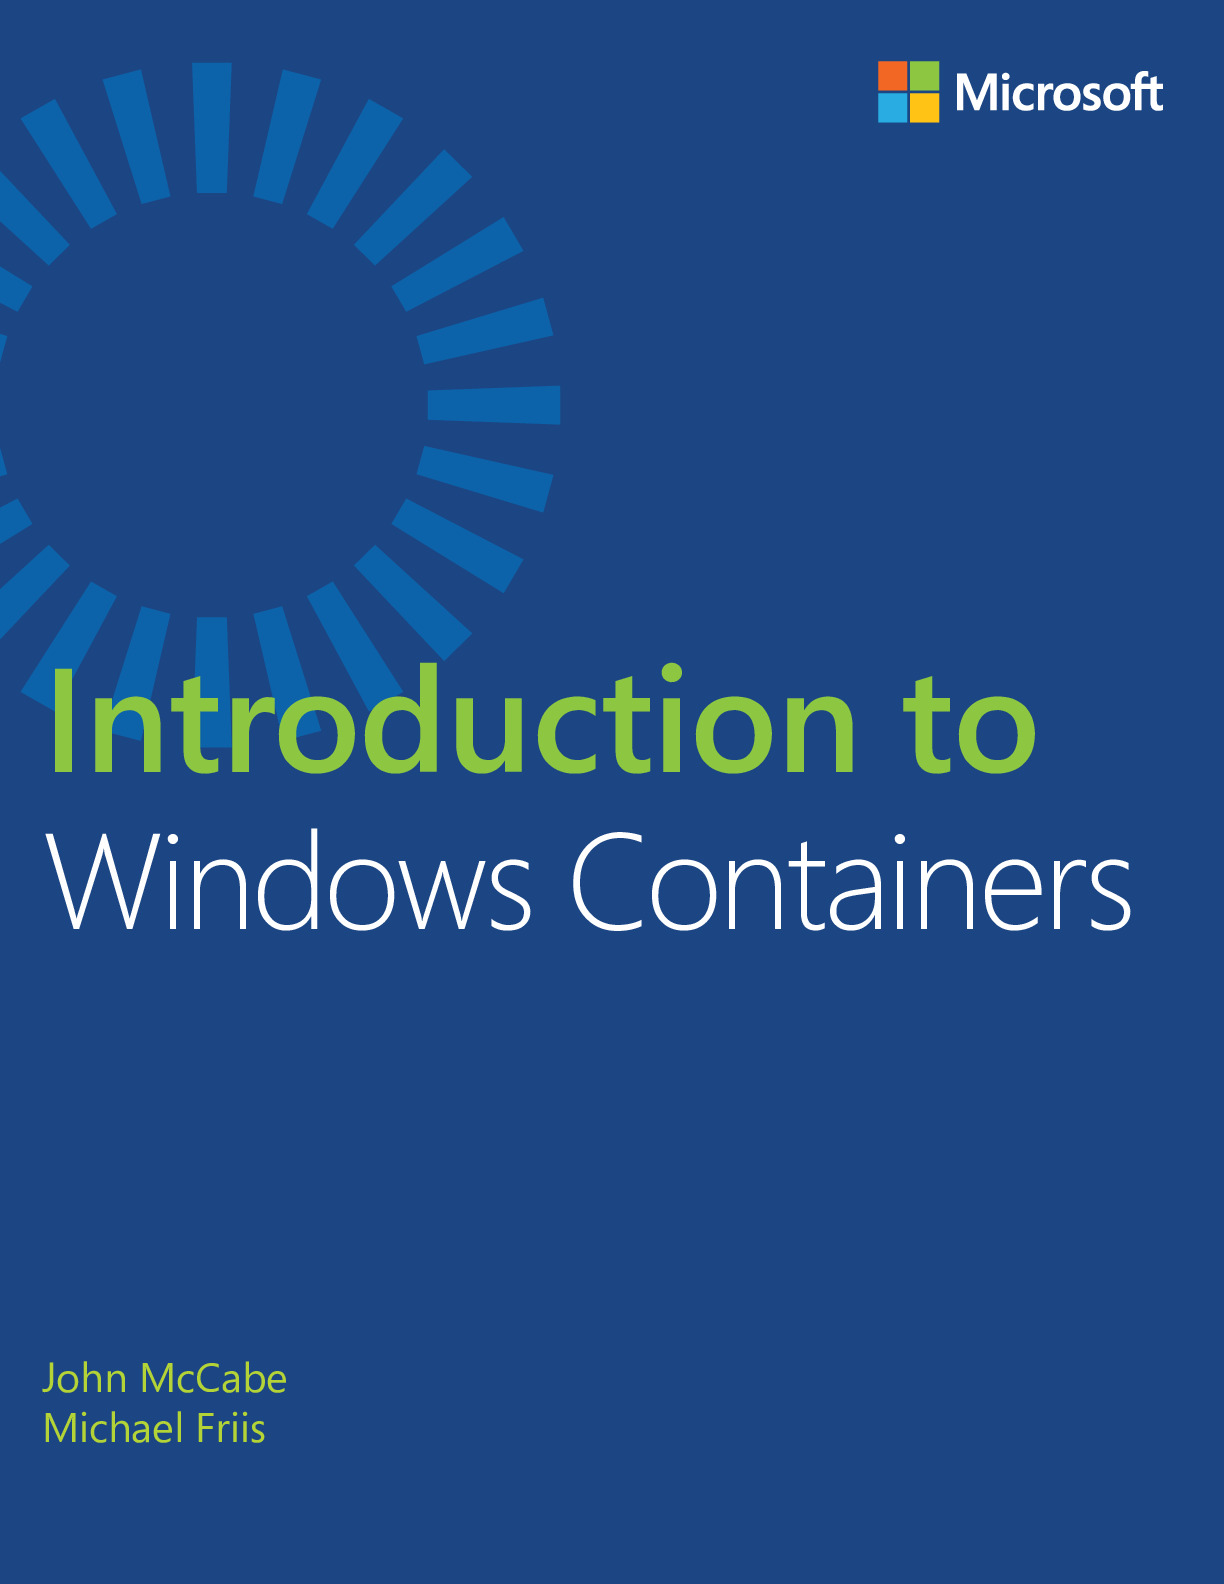 Introduction_to_Containers_ebook